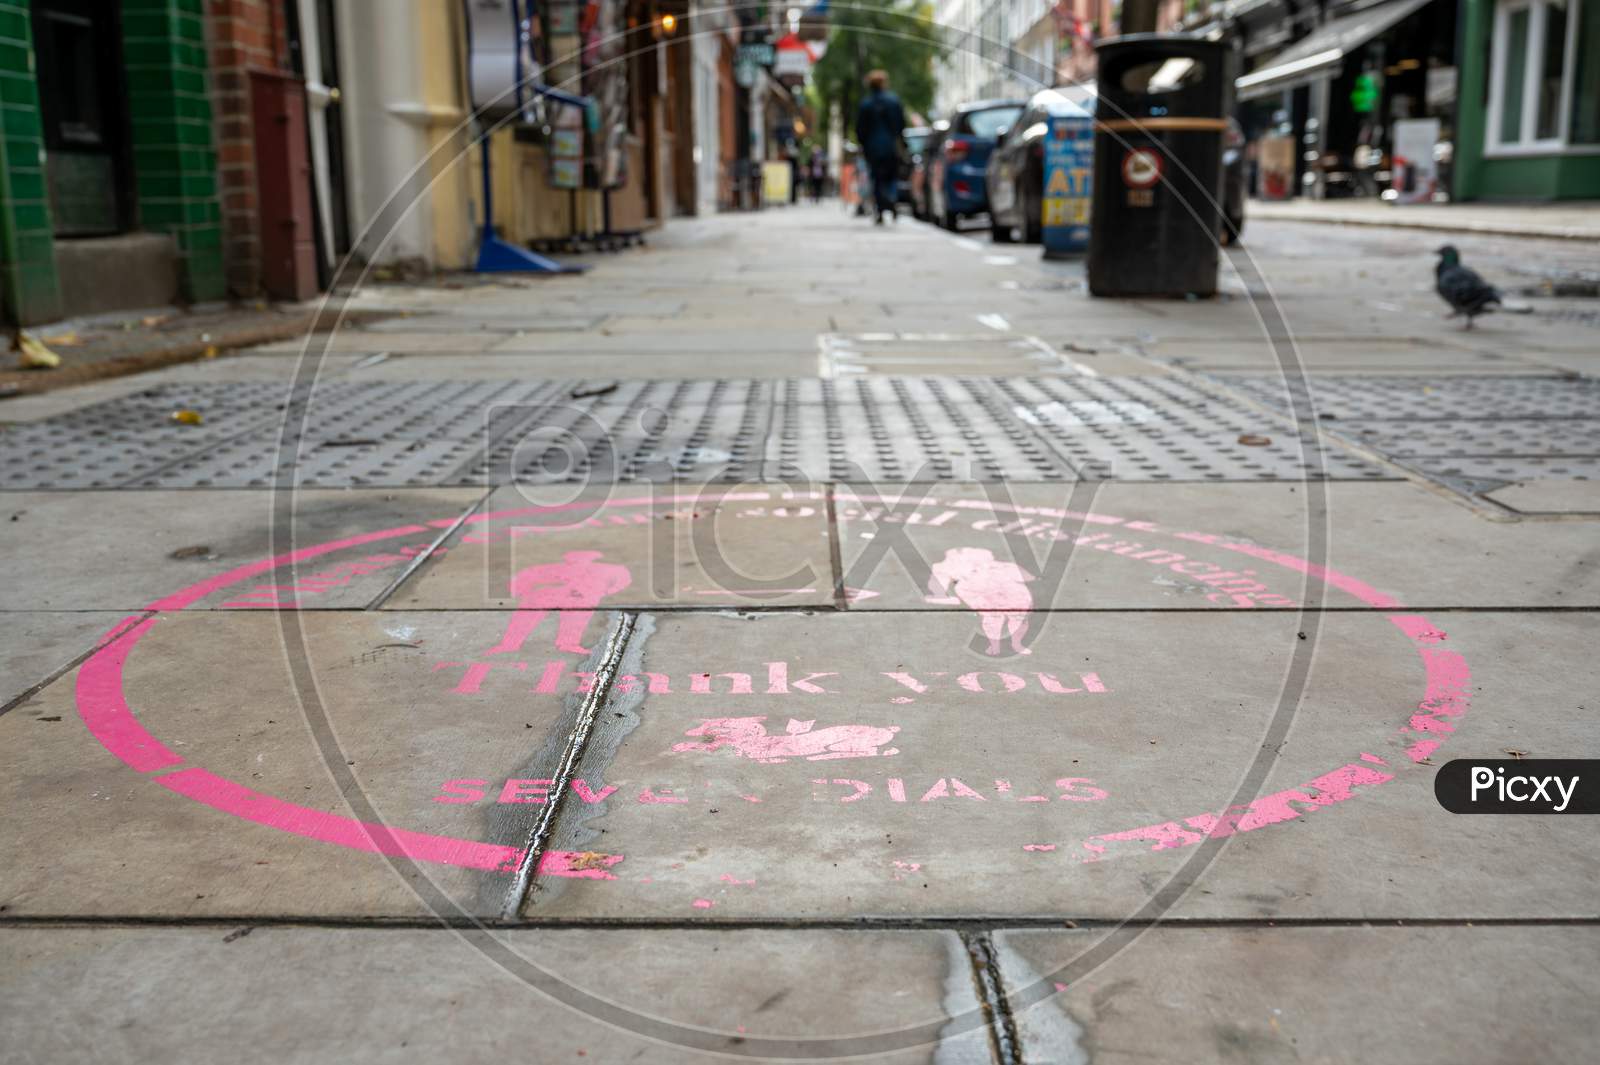 Pink Covid 19 Social Distancing Sign Painted On The Ground In Covent Garden With A Street Out Of Focus In The Background